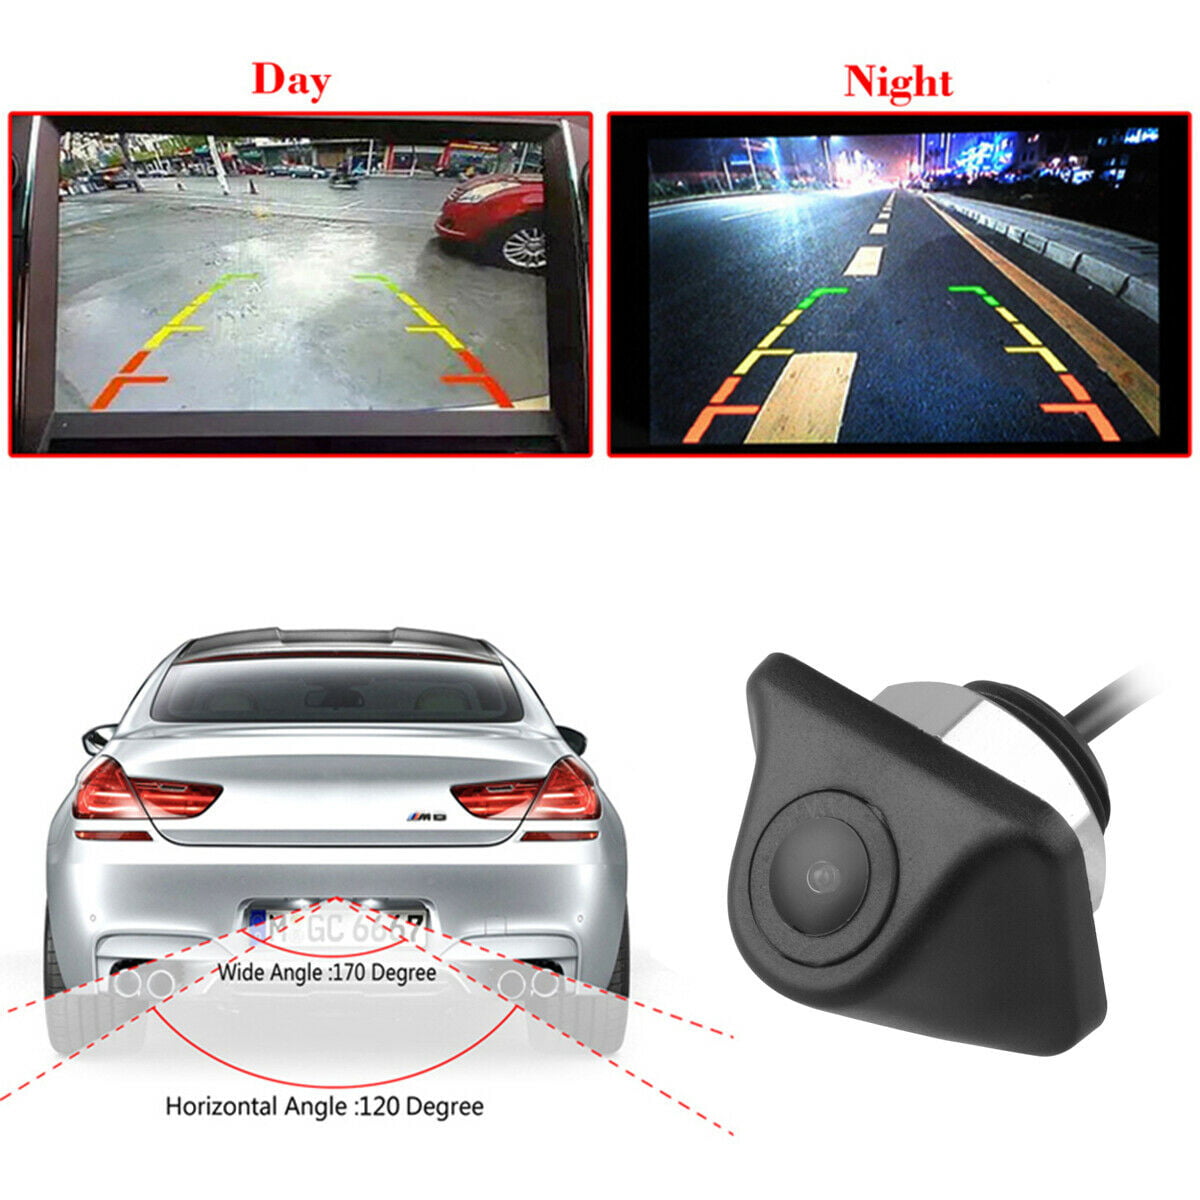 Parking Lane Display Option Voxx ACAM4 HD Wide Angle License Plate Mounted Backup Camera High Light Sensitivity for Nighttime Performance 